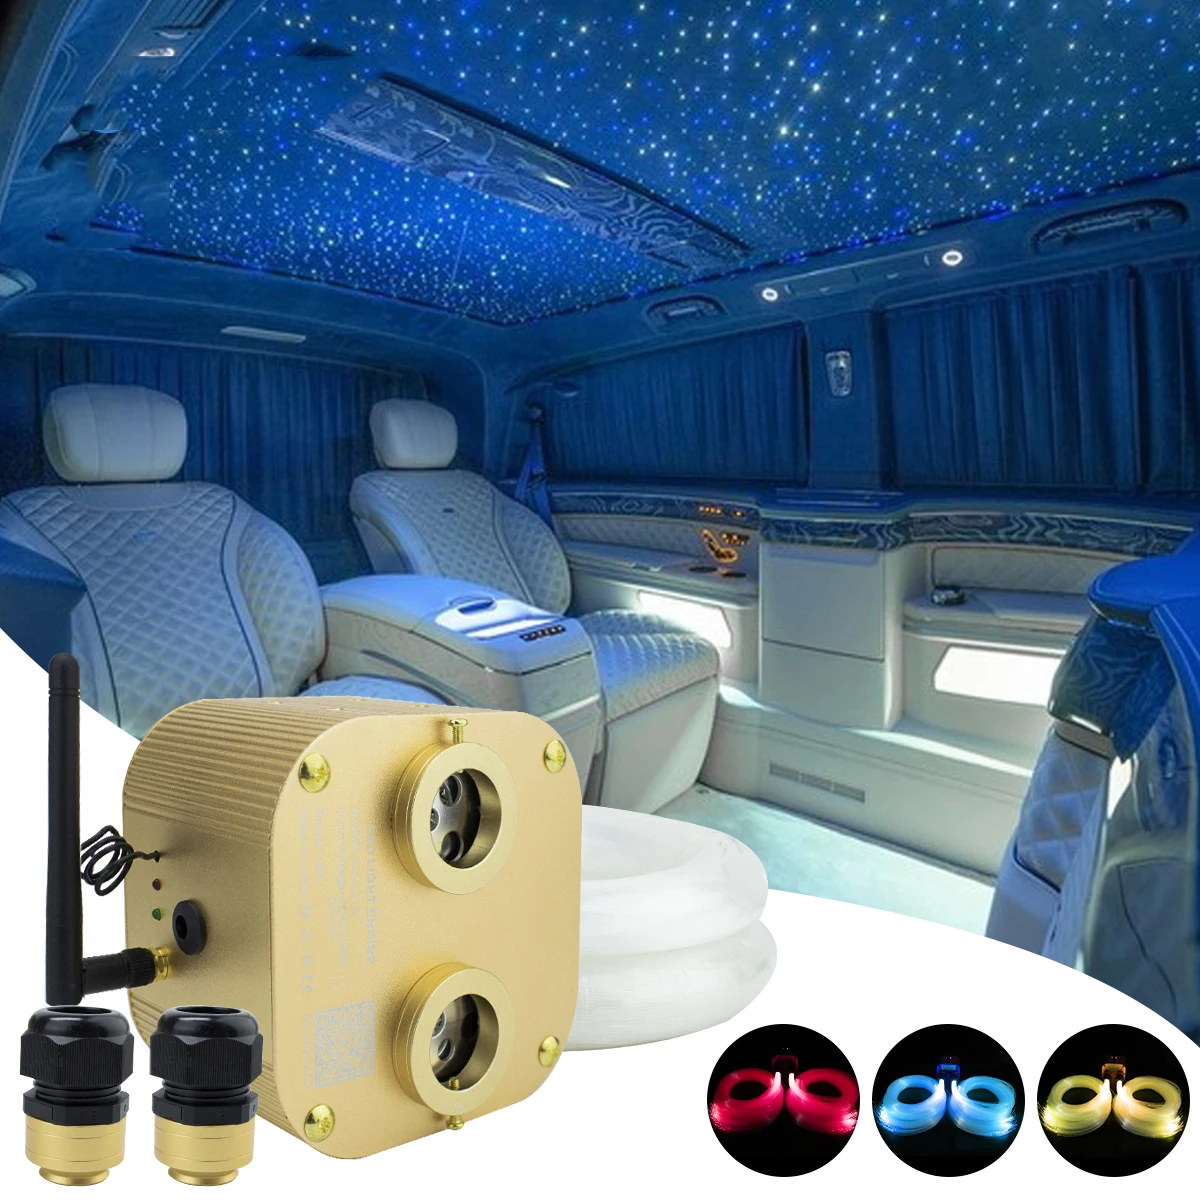 Double Head 20W rgbw Twinkle Led Fiber Optic Star Sky Ceiling Kit 4M end Glow Optical  For Car Roof Star  Lighting APP control